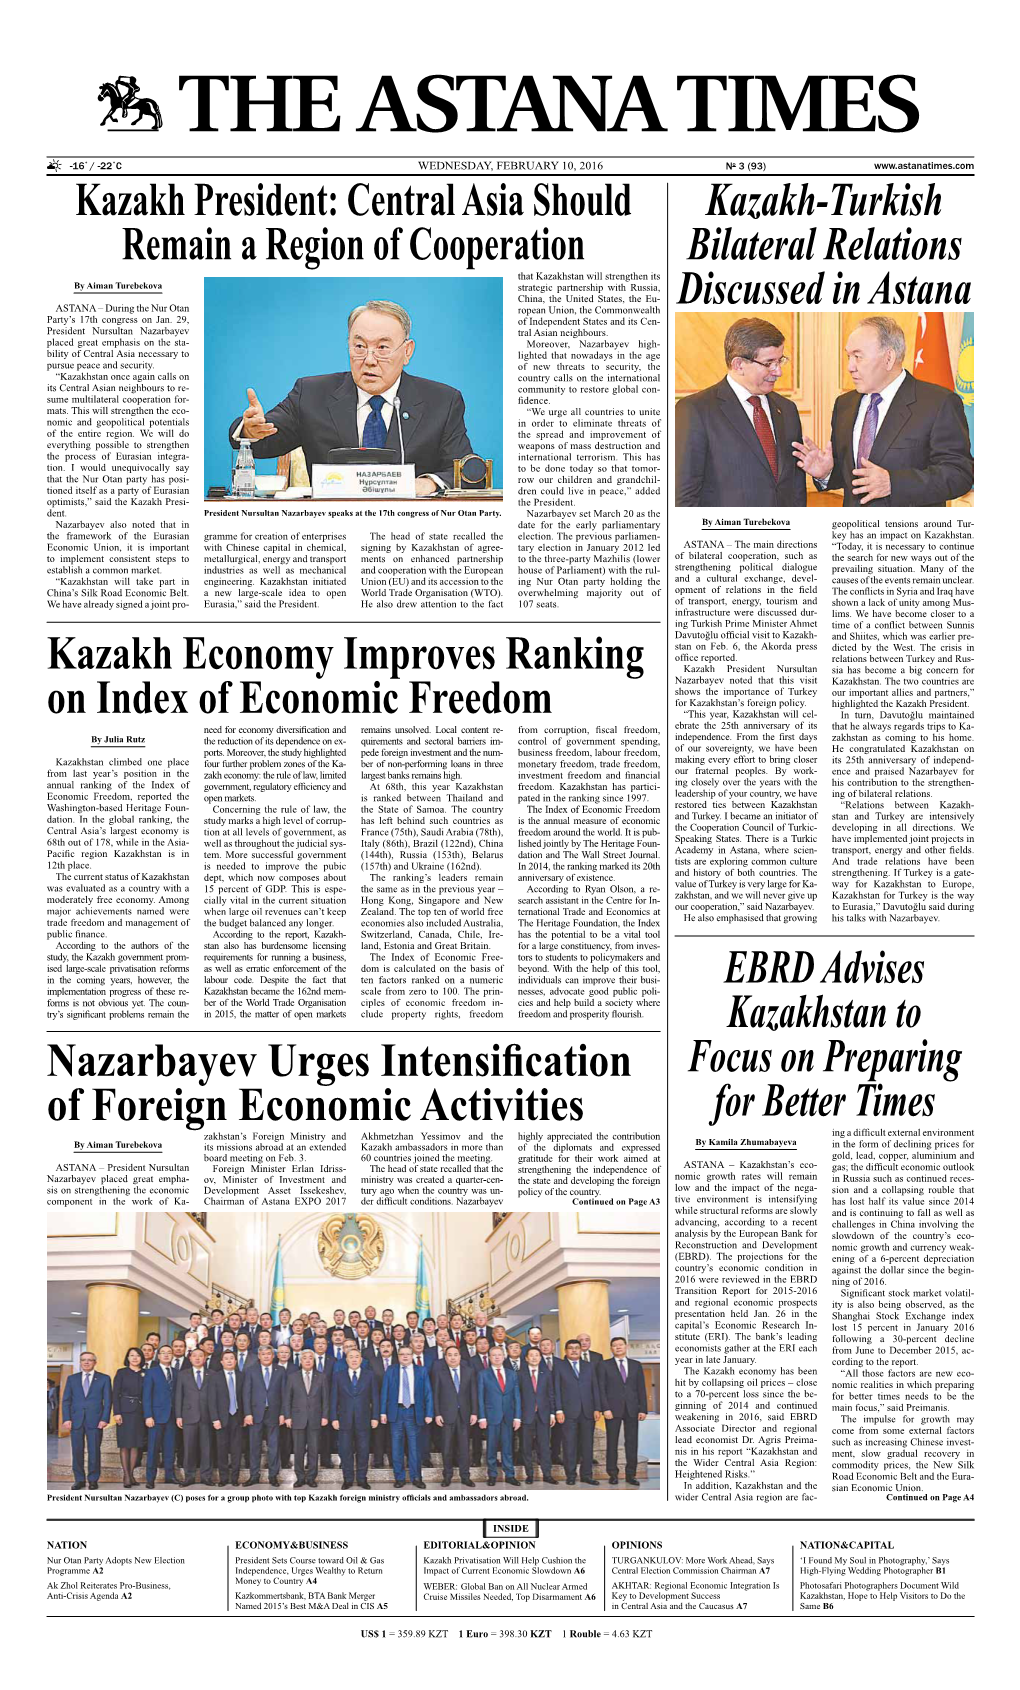 Nazarbayev Urges Intensification of Foreign Economic Activities EBRD